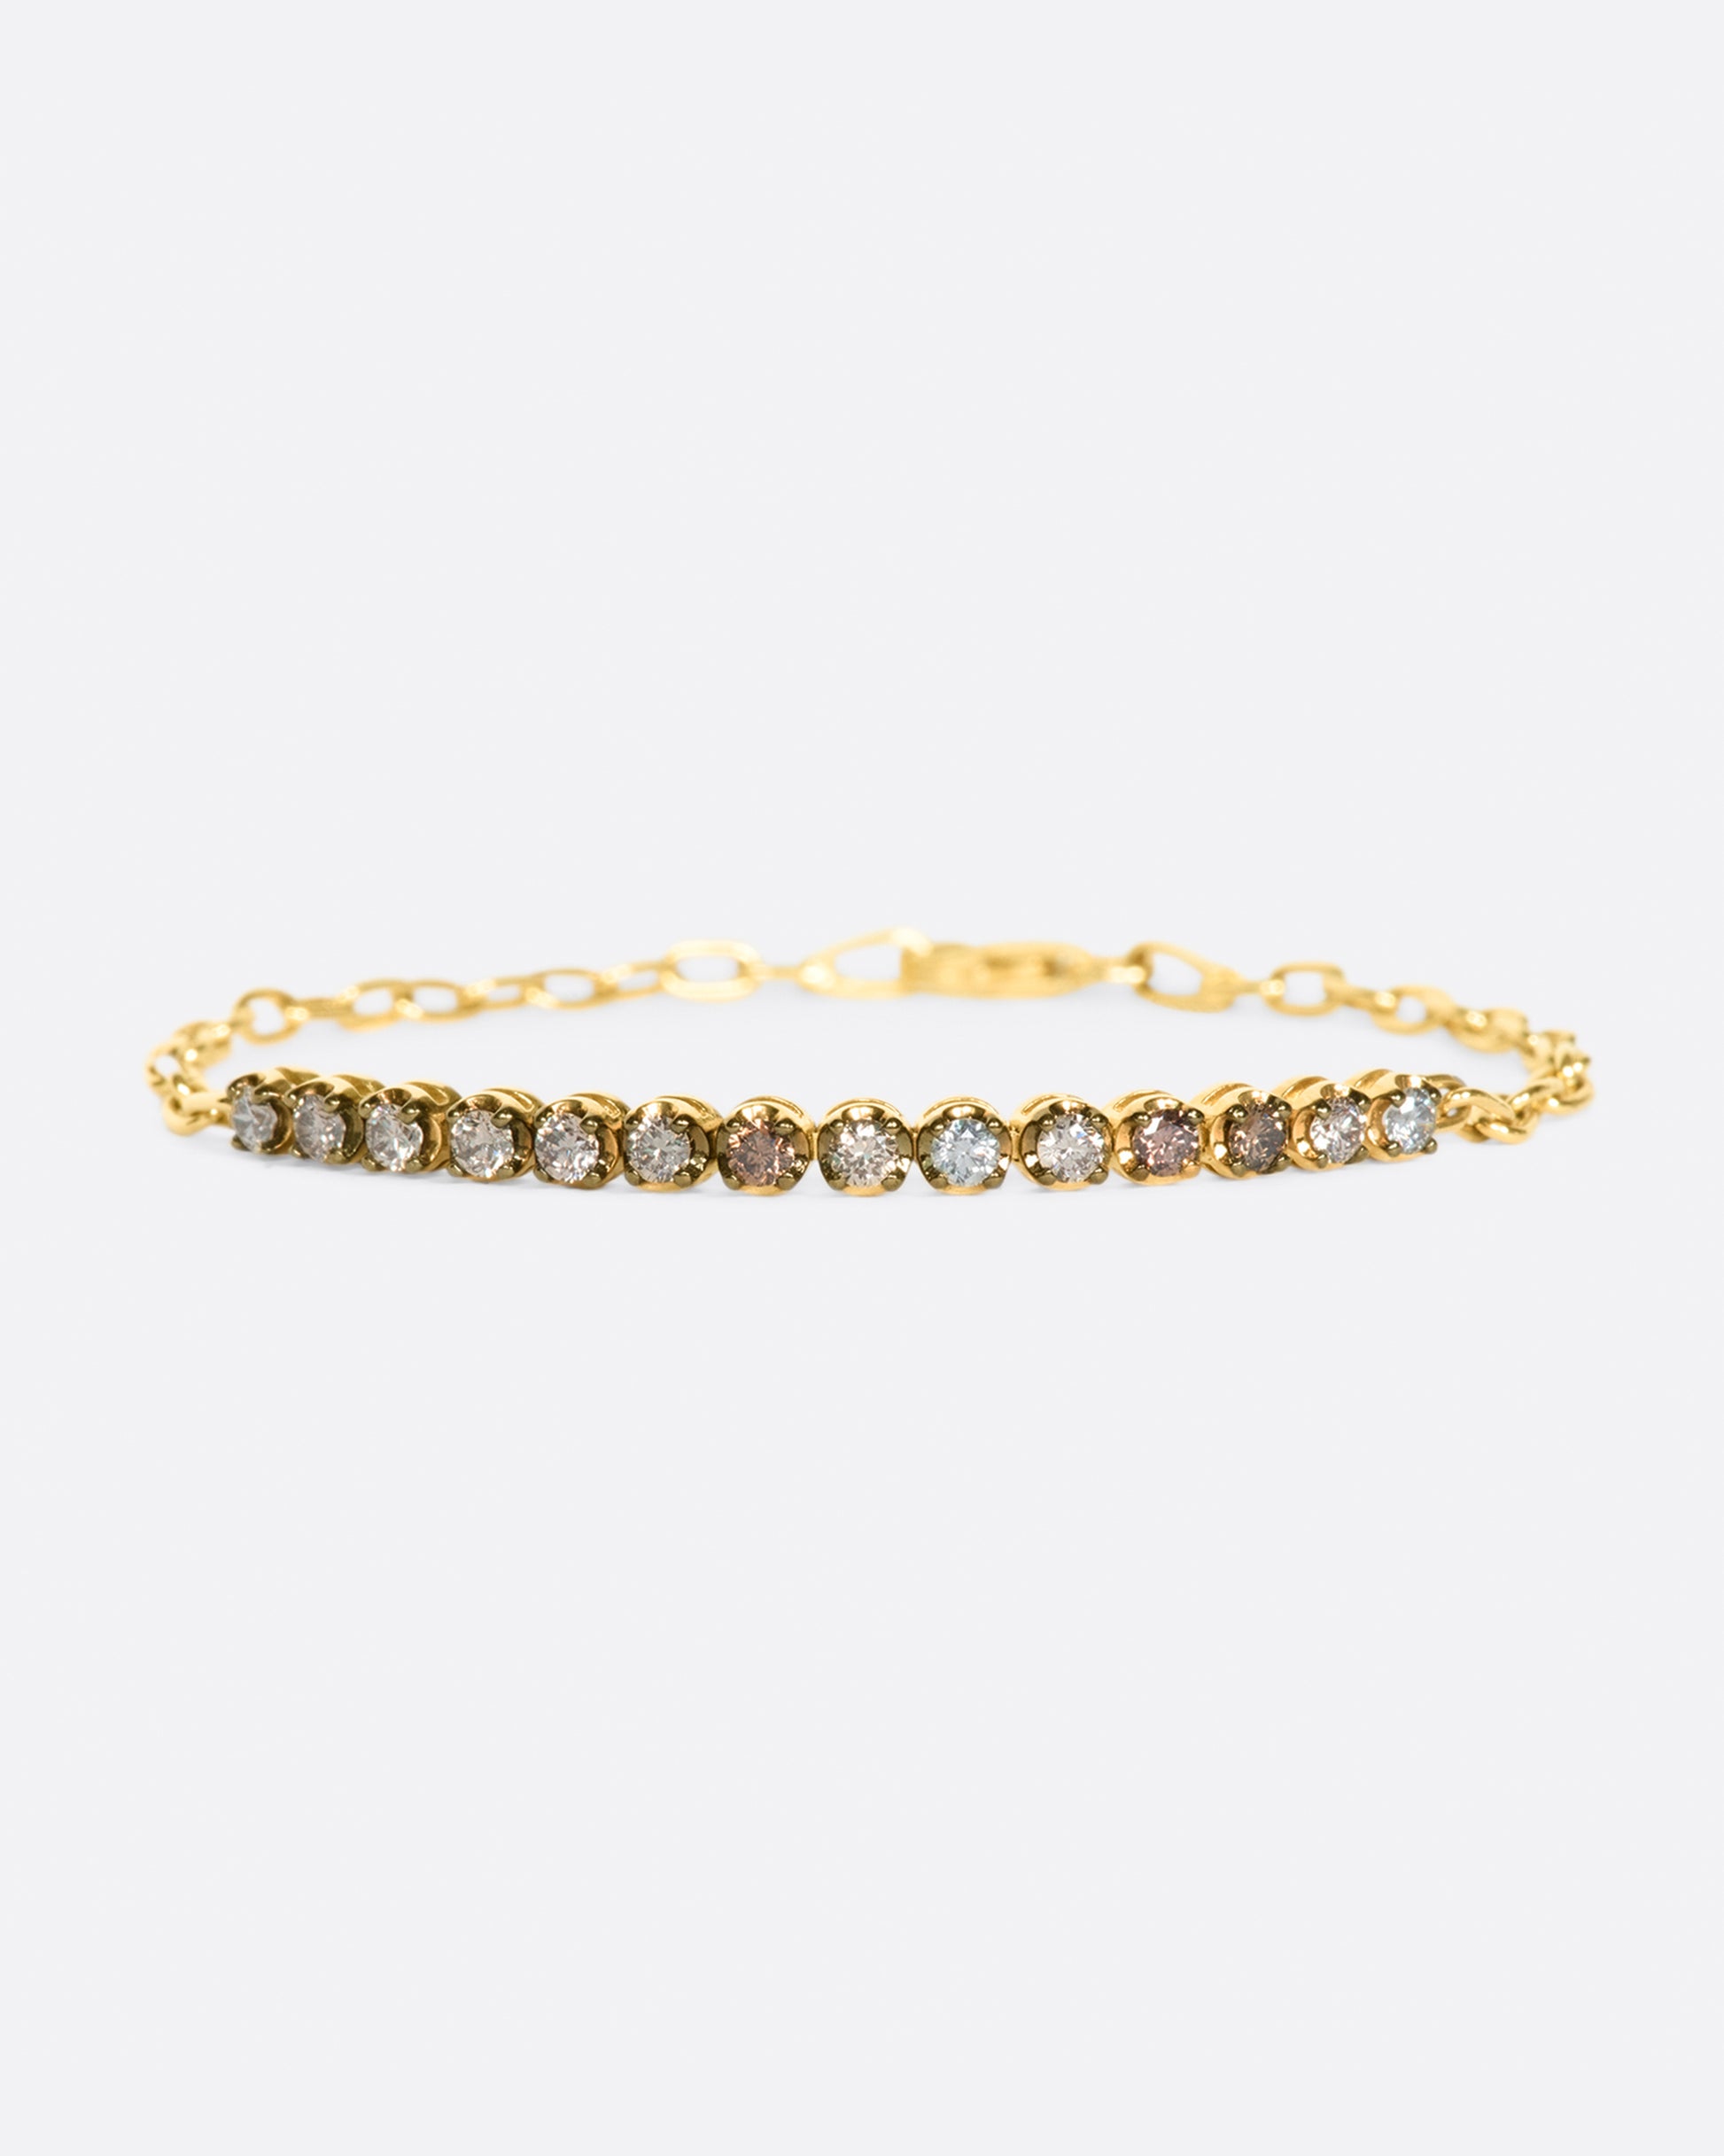 A partial tennis bracelet with a mix of light & dark champagne and gray diamonds set in darkened settings so they really glow.